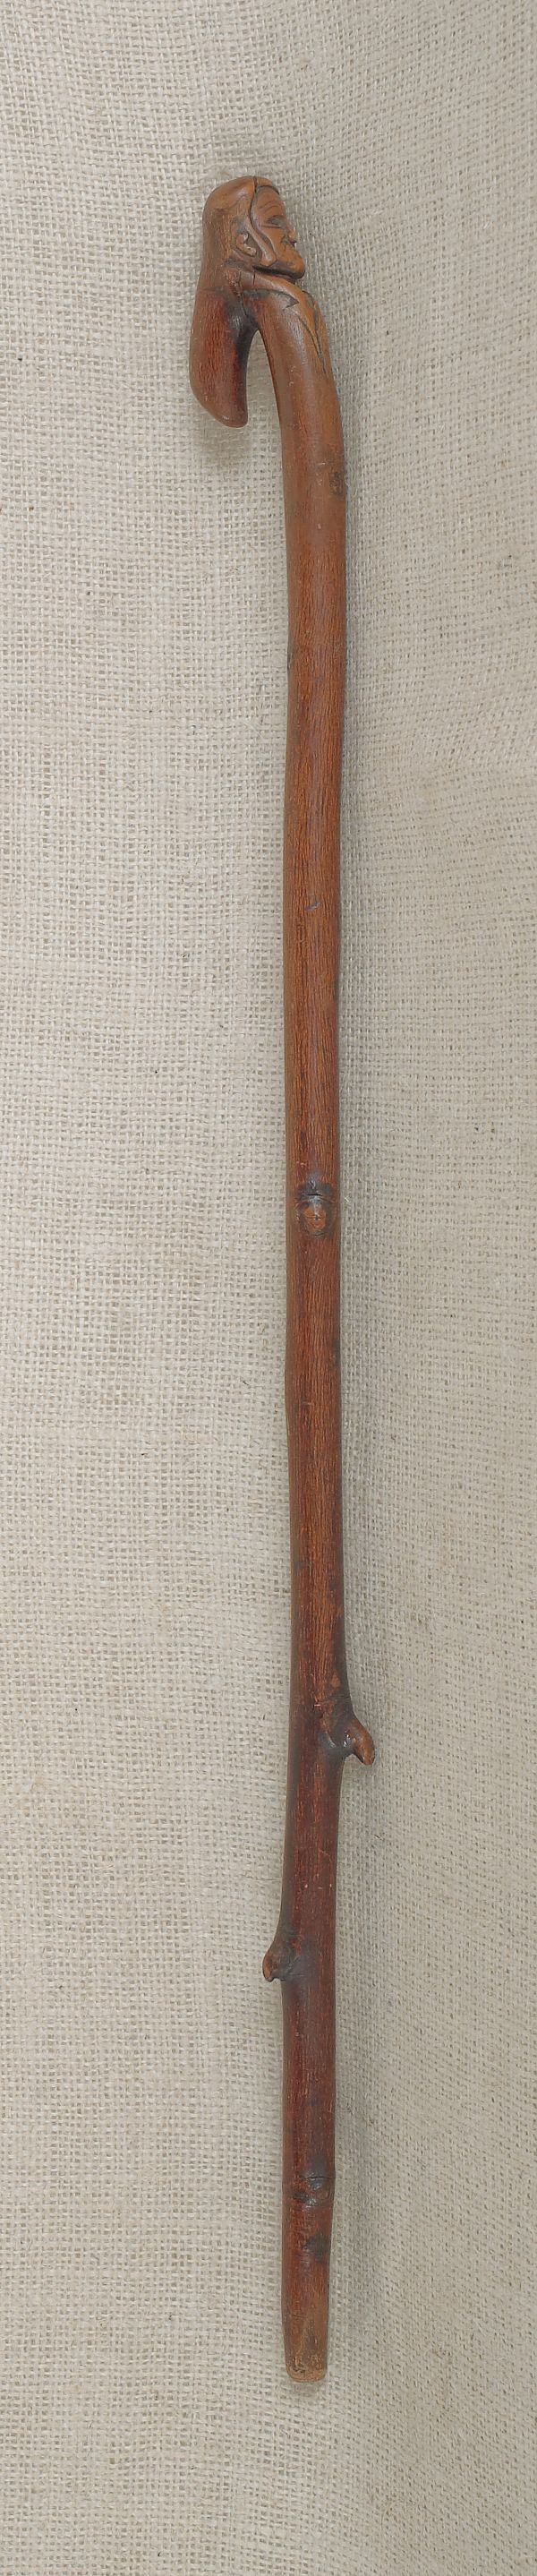 Carved cane late 19th c. the grip in